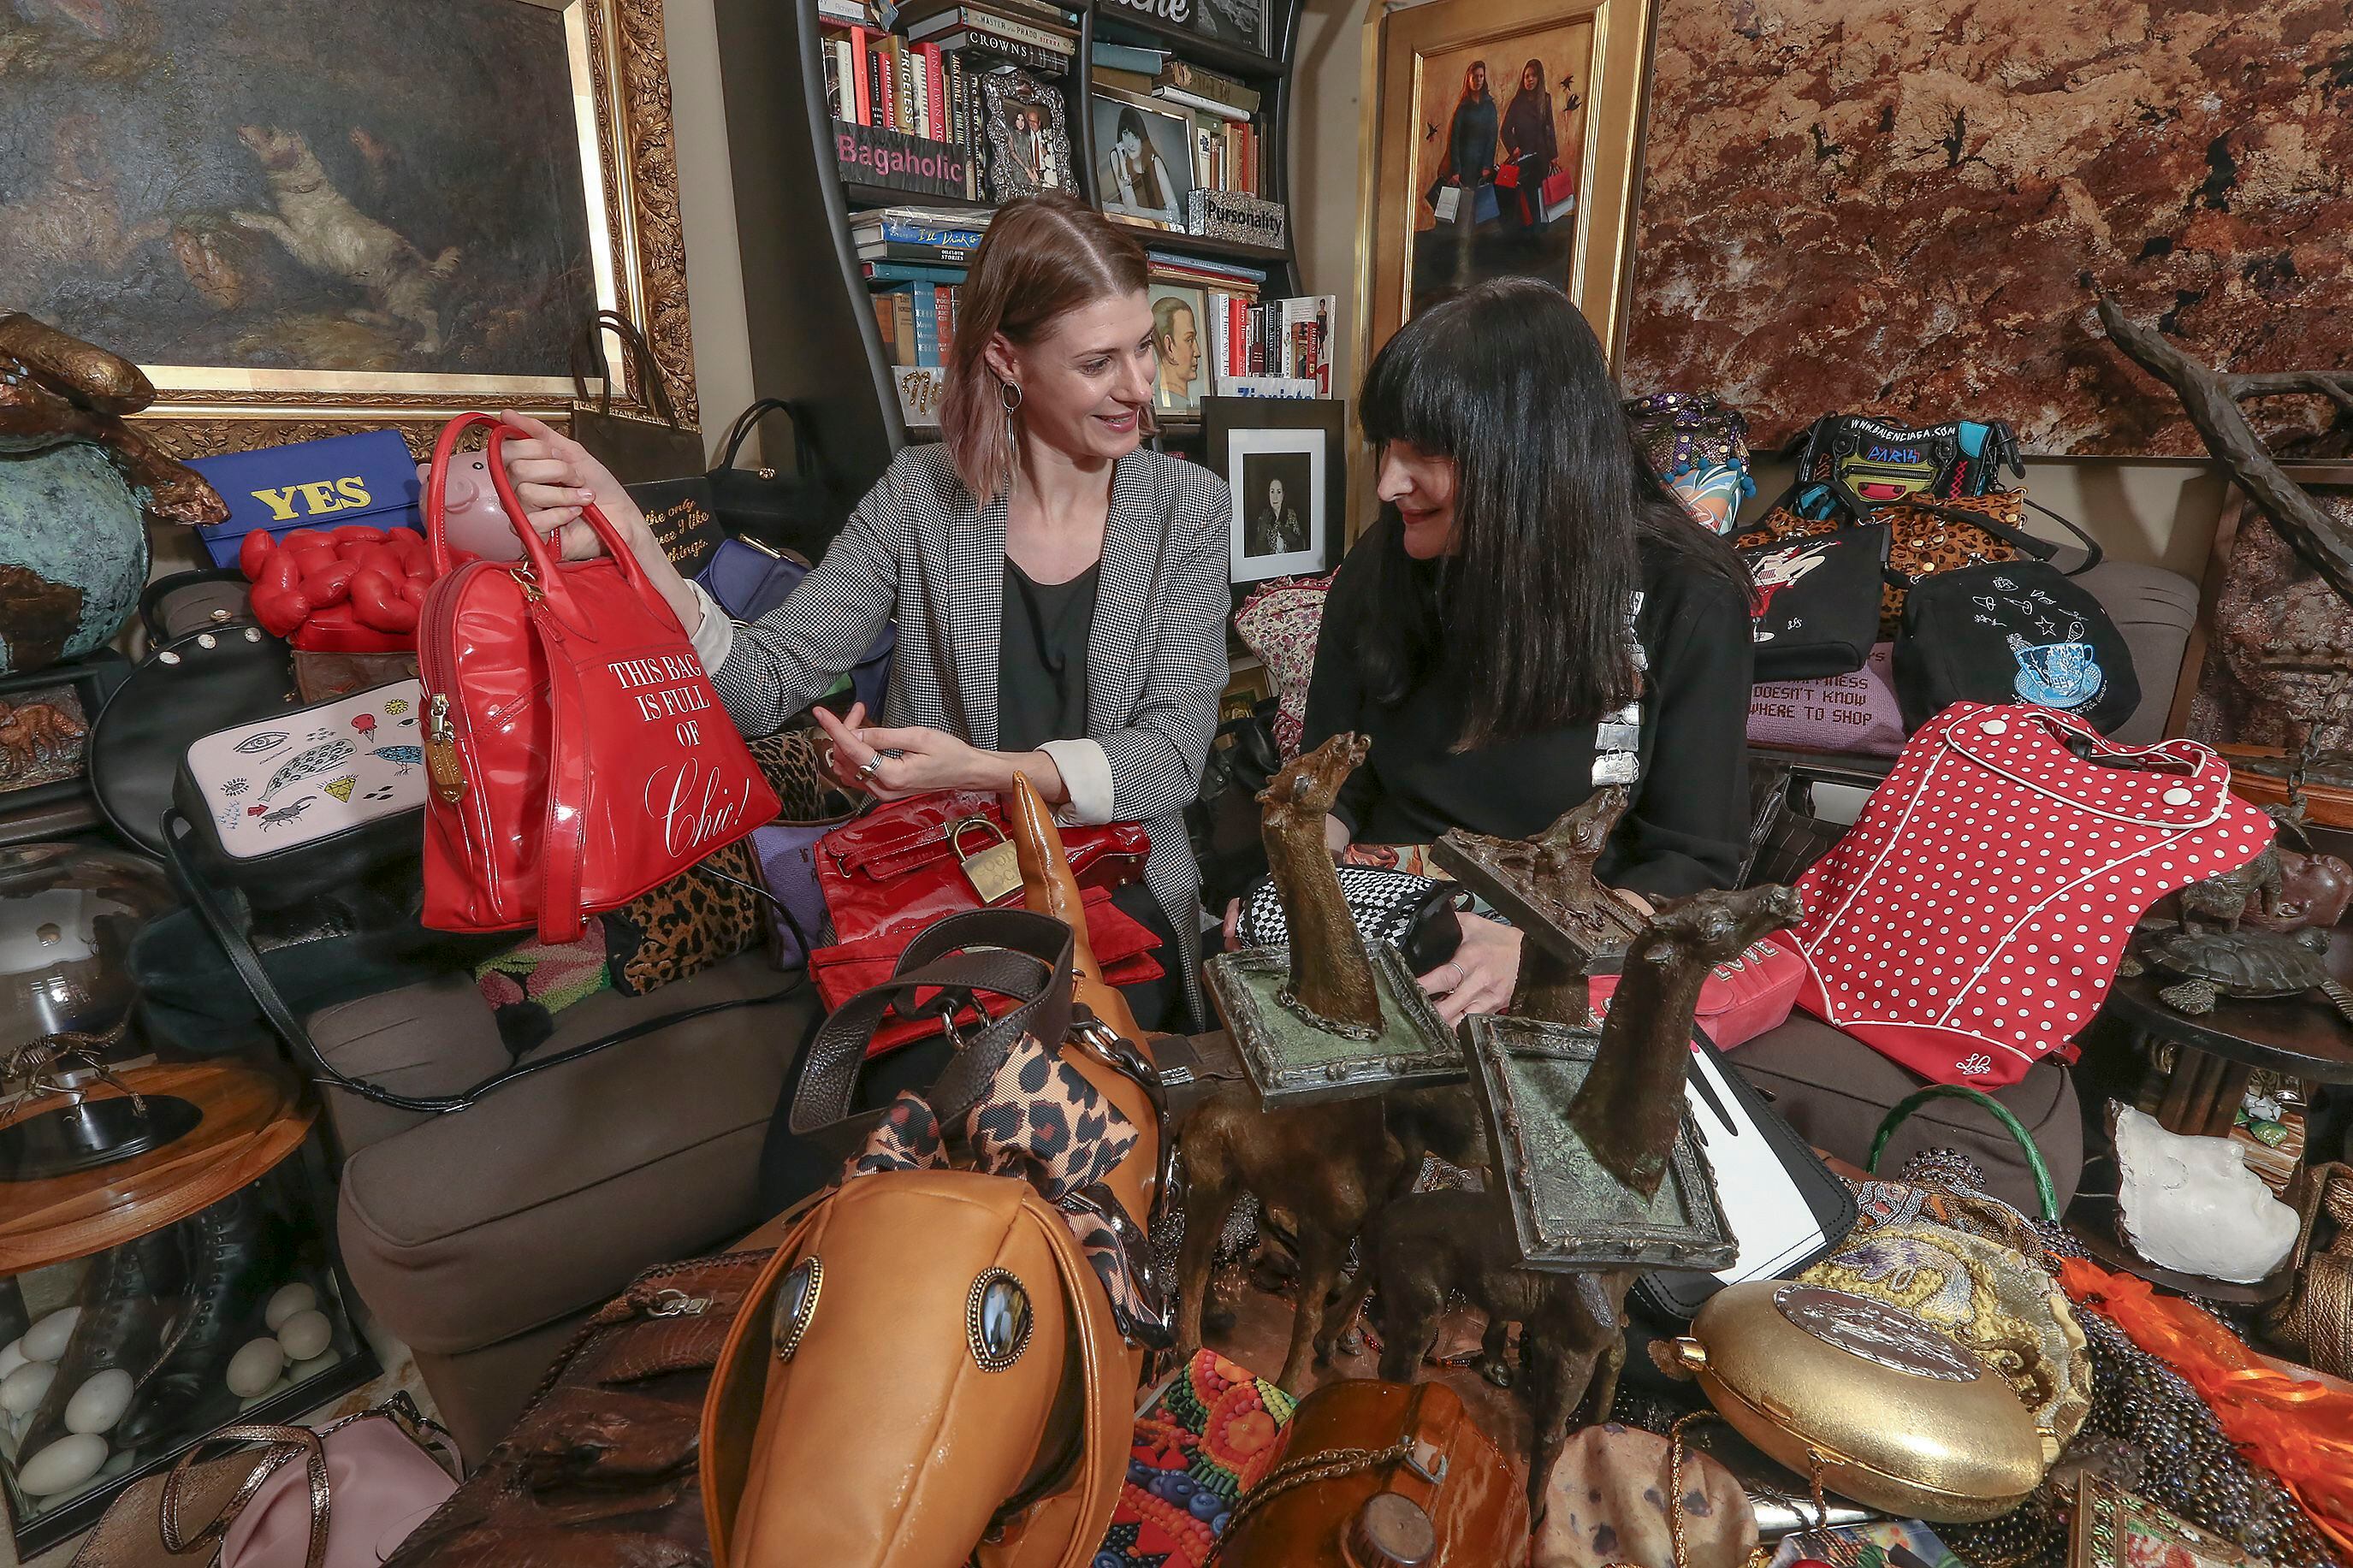 Emmaus woman puts what may be world's largest collection of purses